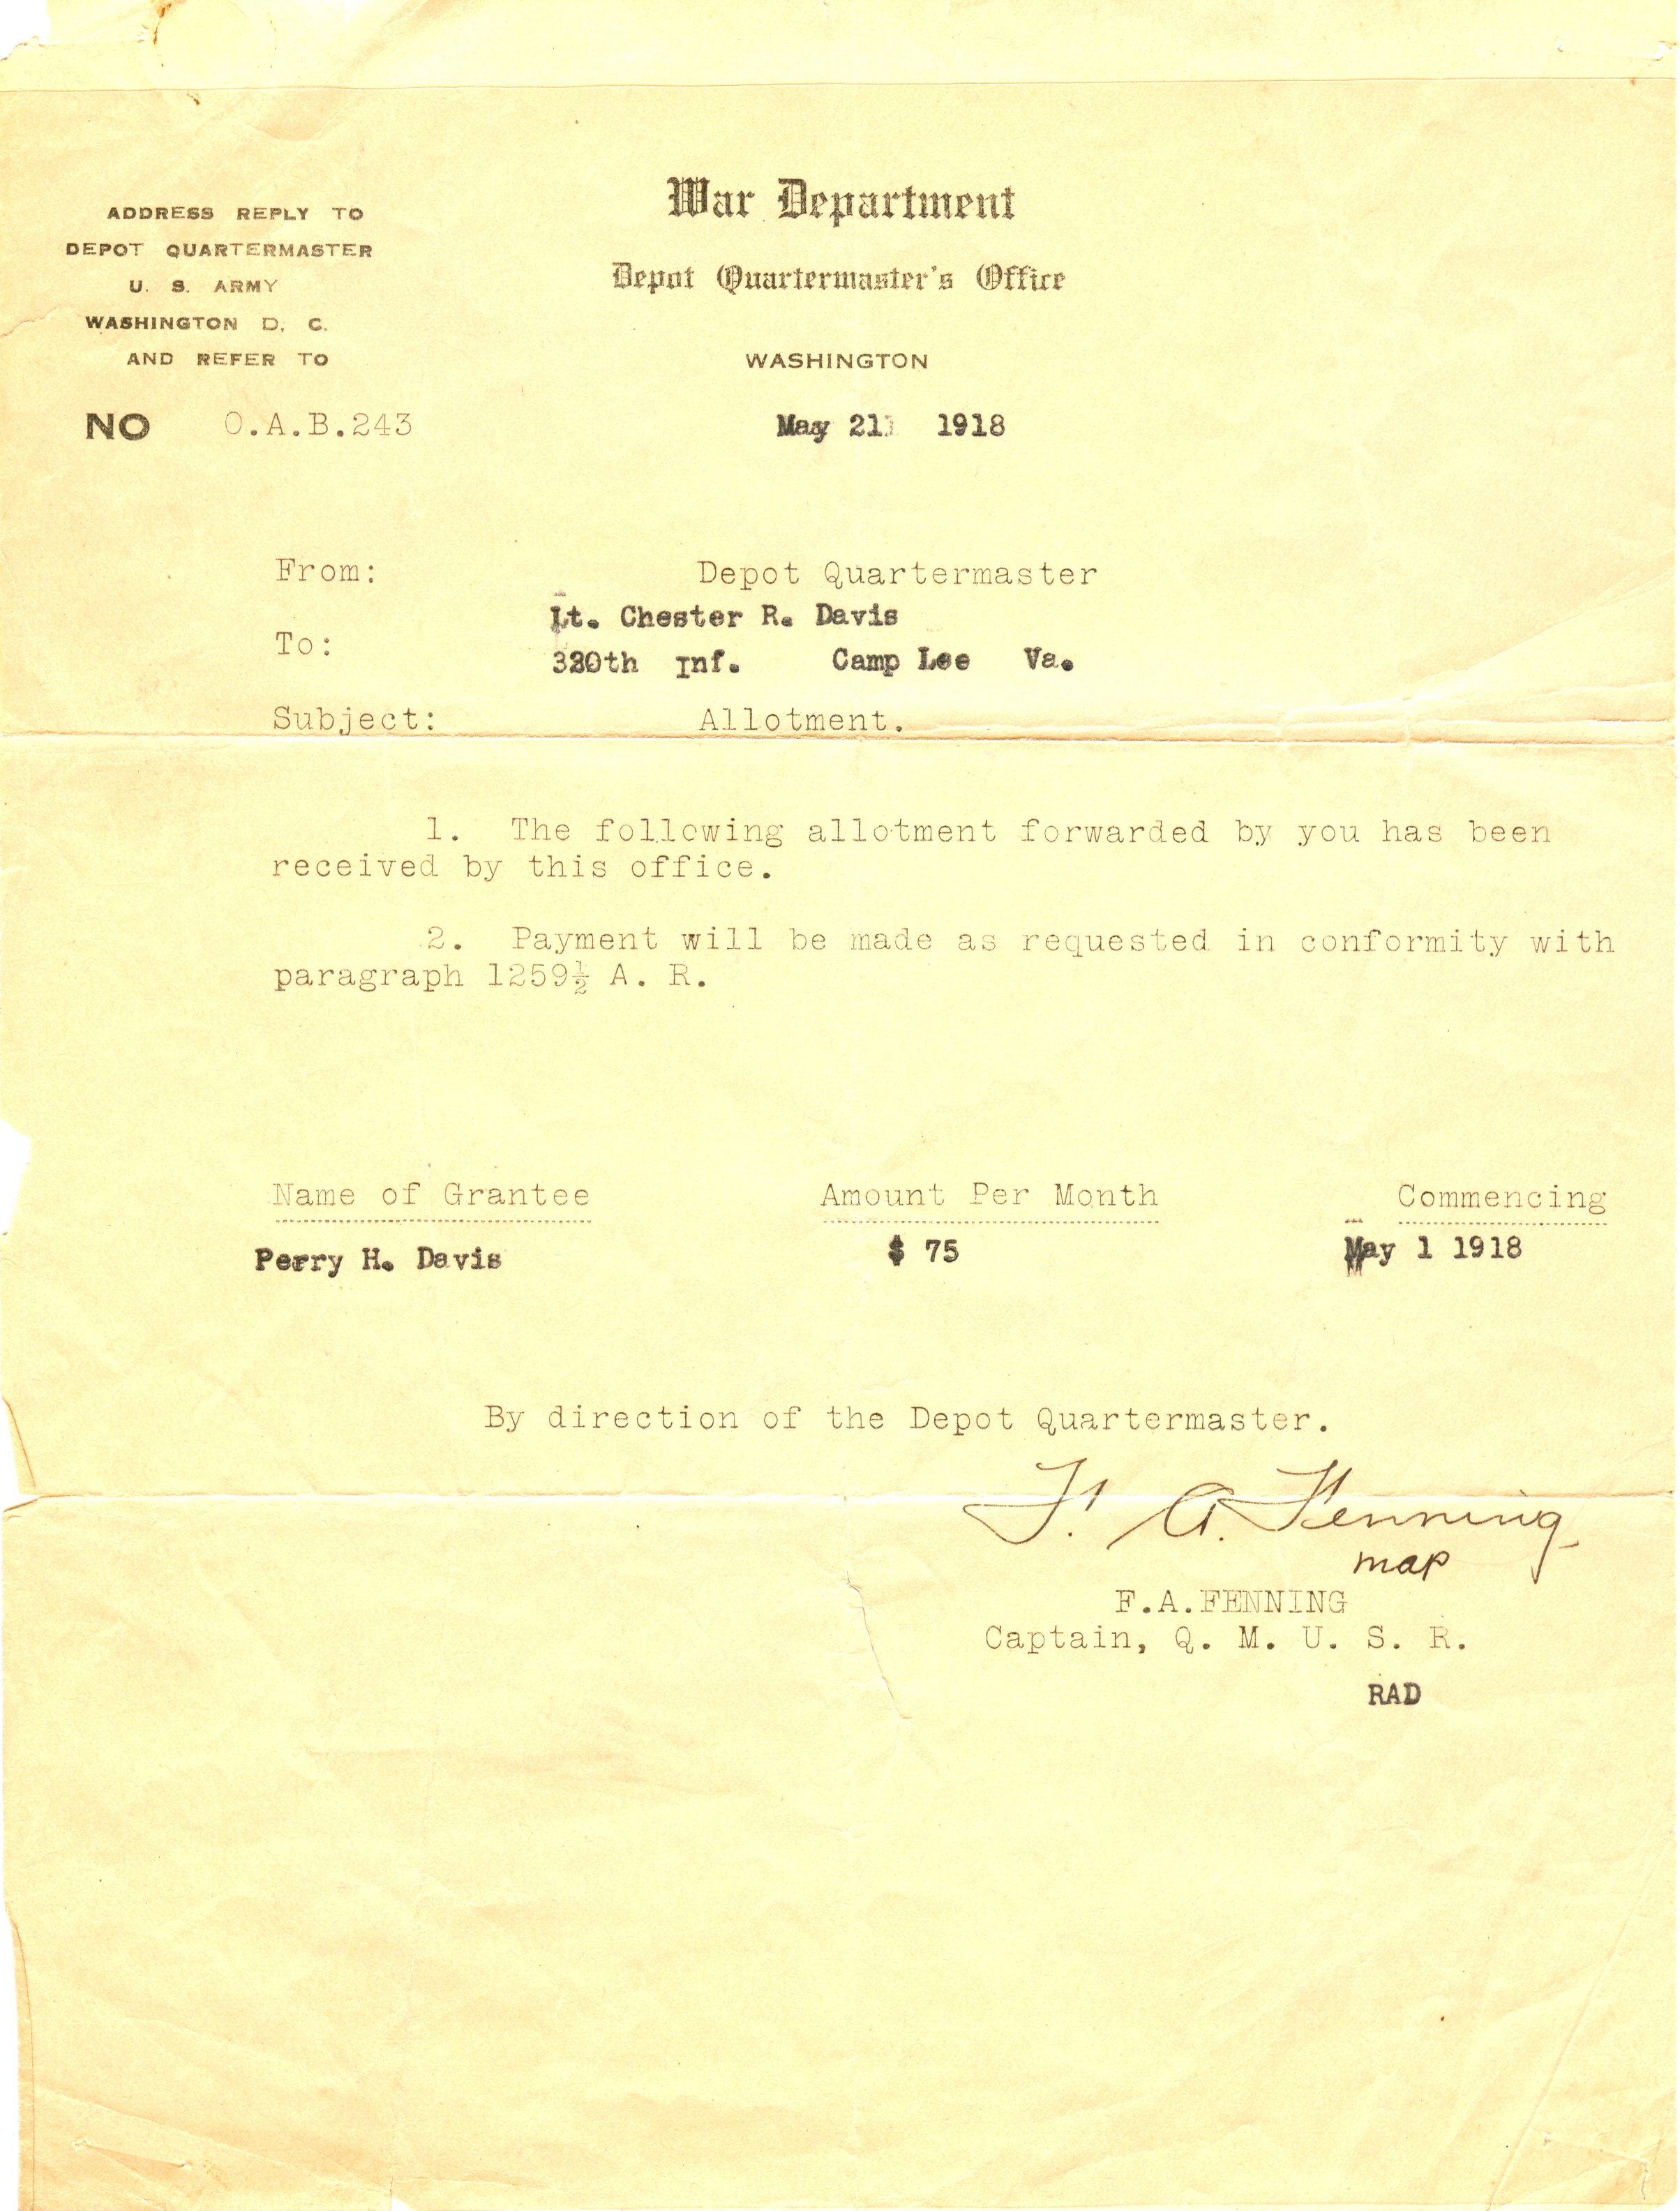 1794 - May 21, 1918 letter from War Department.jpg